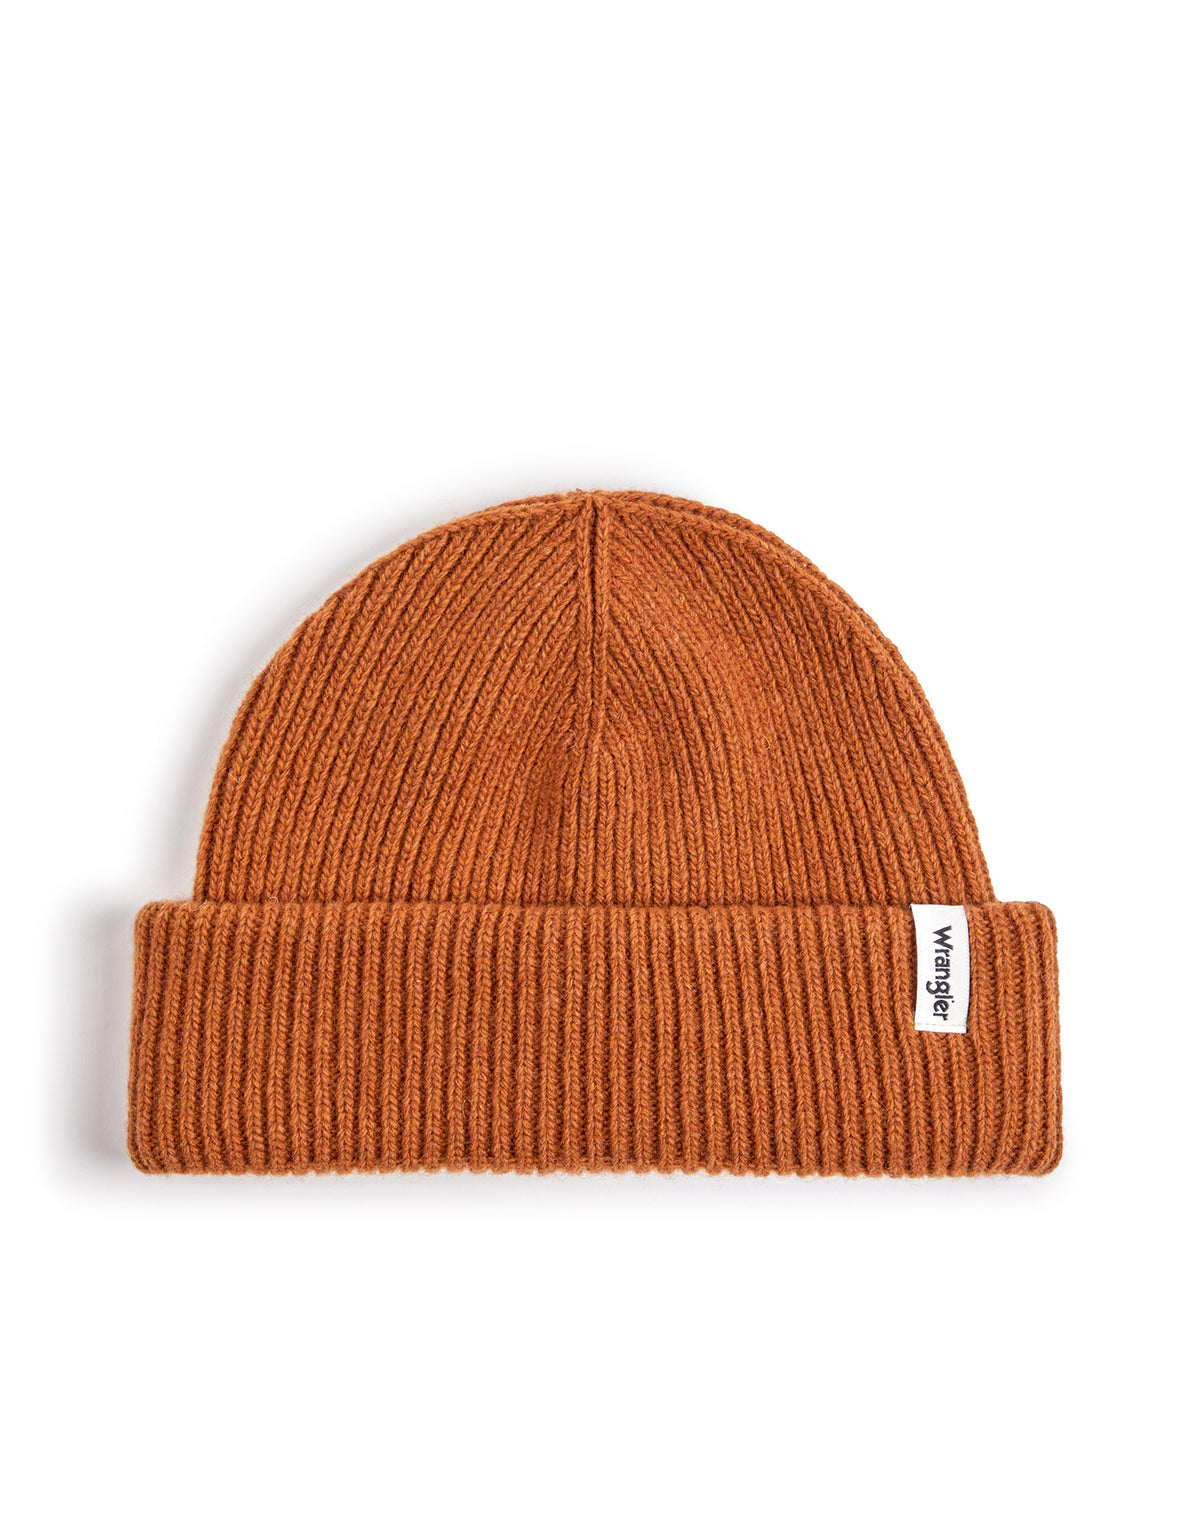 Sign Off Beanie in Leather Brown